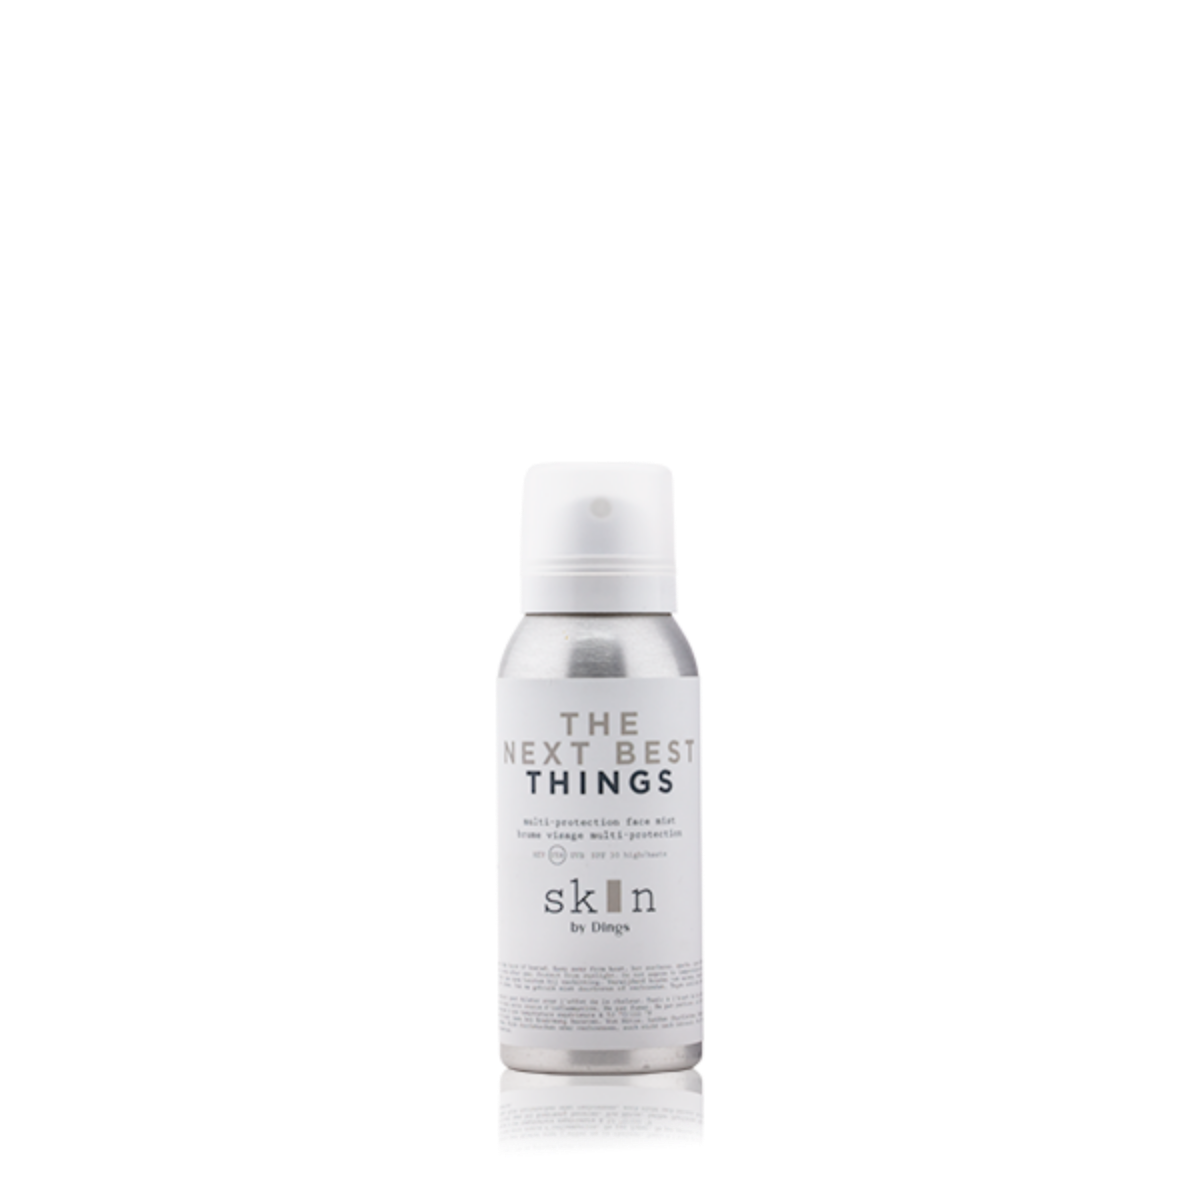 THE NEXT BEST THINGS SPF 30 - SKIN BY DINGS